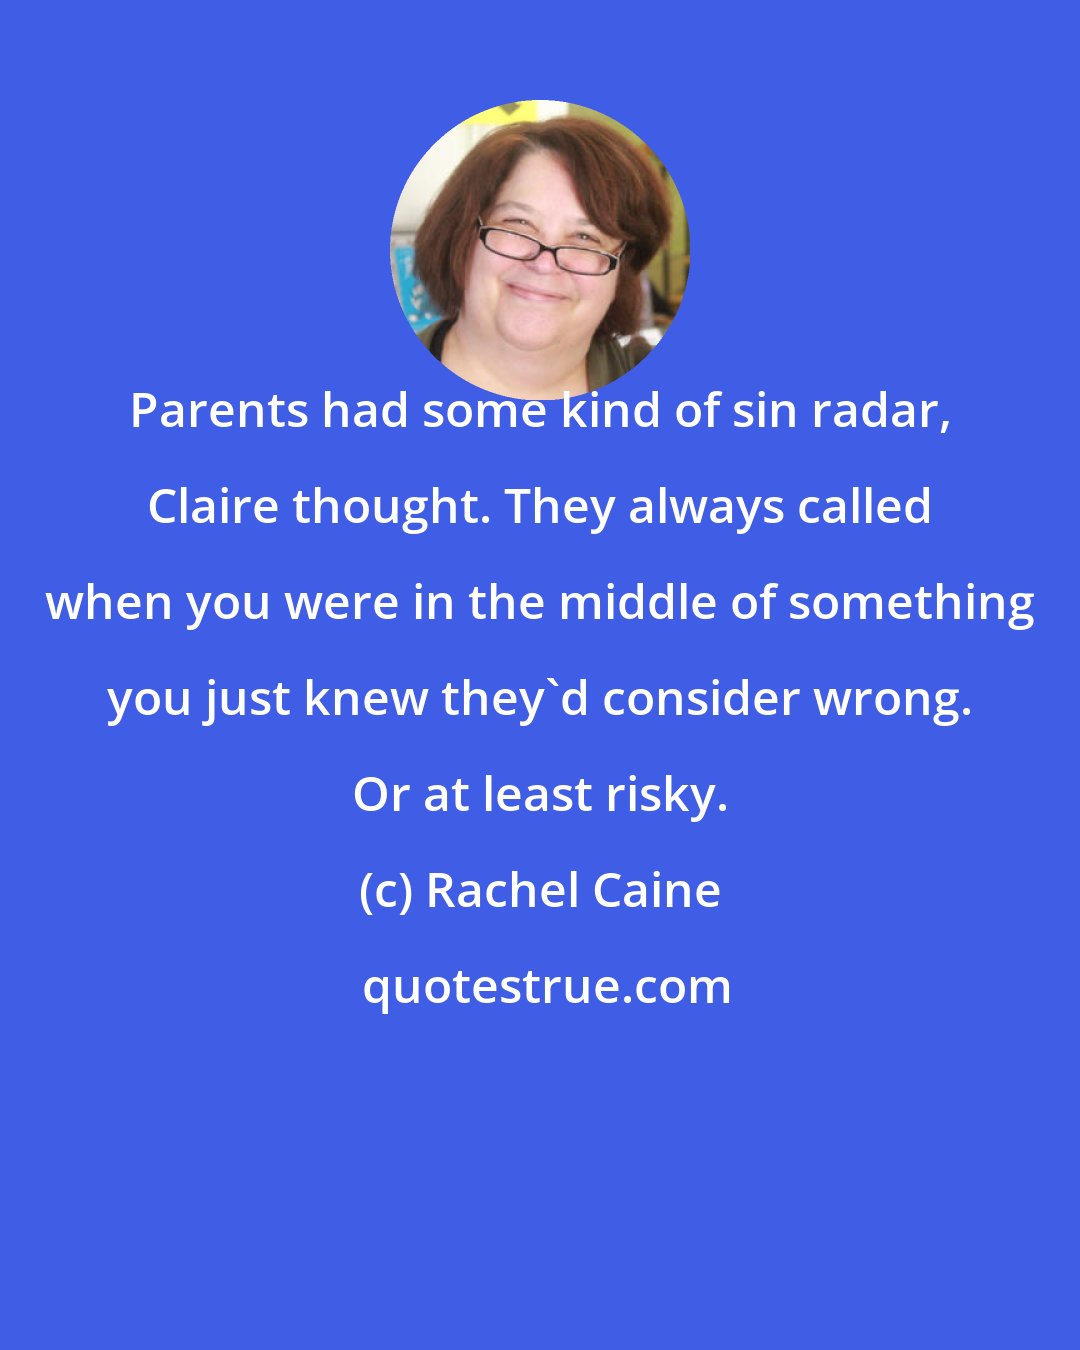 Rachel Caine: Parents had some kind of sin radar, Claire thought. They always called when you were in the middle of something you just knew they'd consider wrong. Or at least risky.